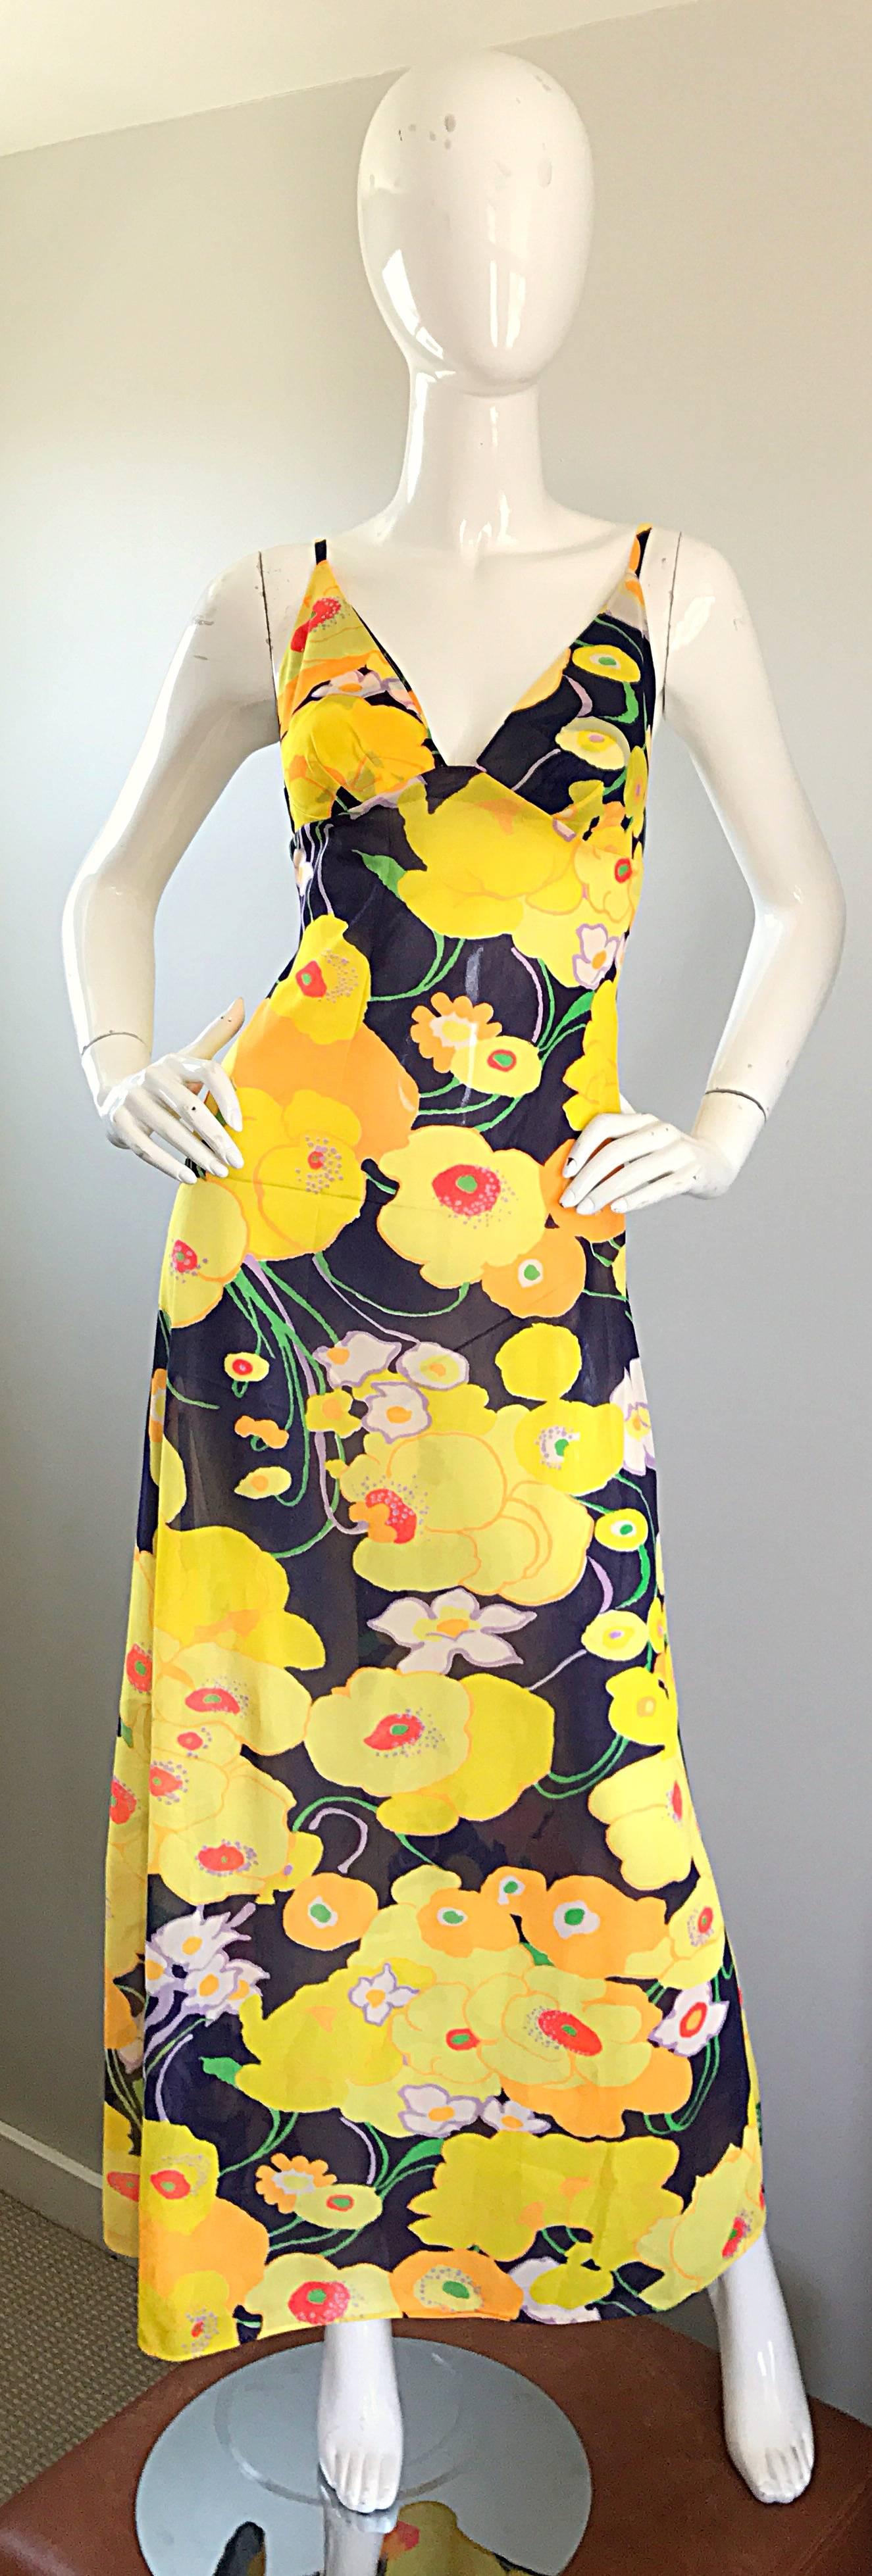 Amazing 1970s CHRISTIAN DIOR / MISS DIOR vibrant colored flower maxi dress and jacket! Features brightly colored flower prints in yellow, navy blue, red, white, lavender purple, green and orange throughout. Maxi dress features a fitted bodice with a